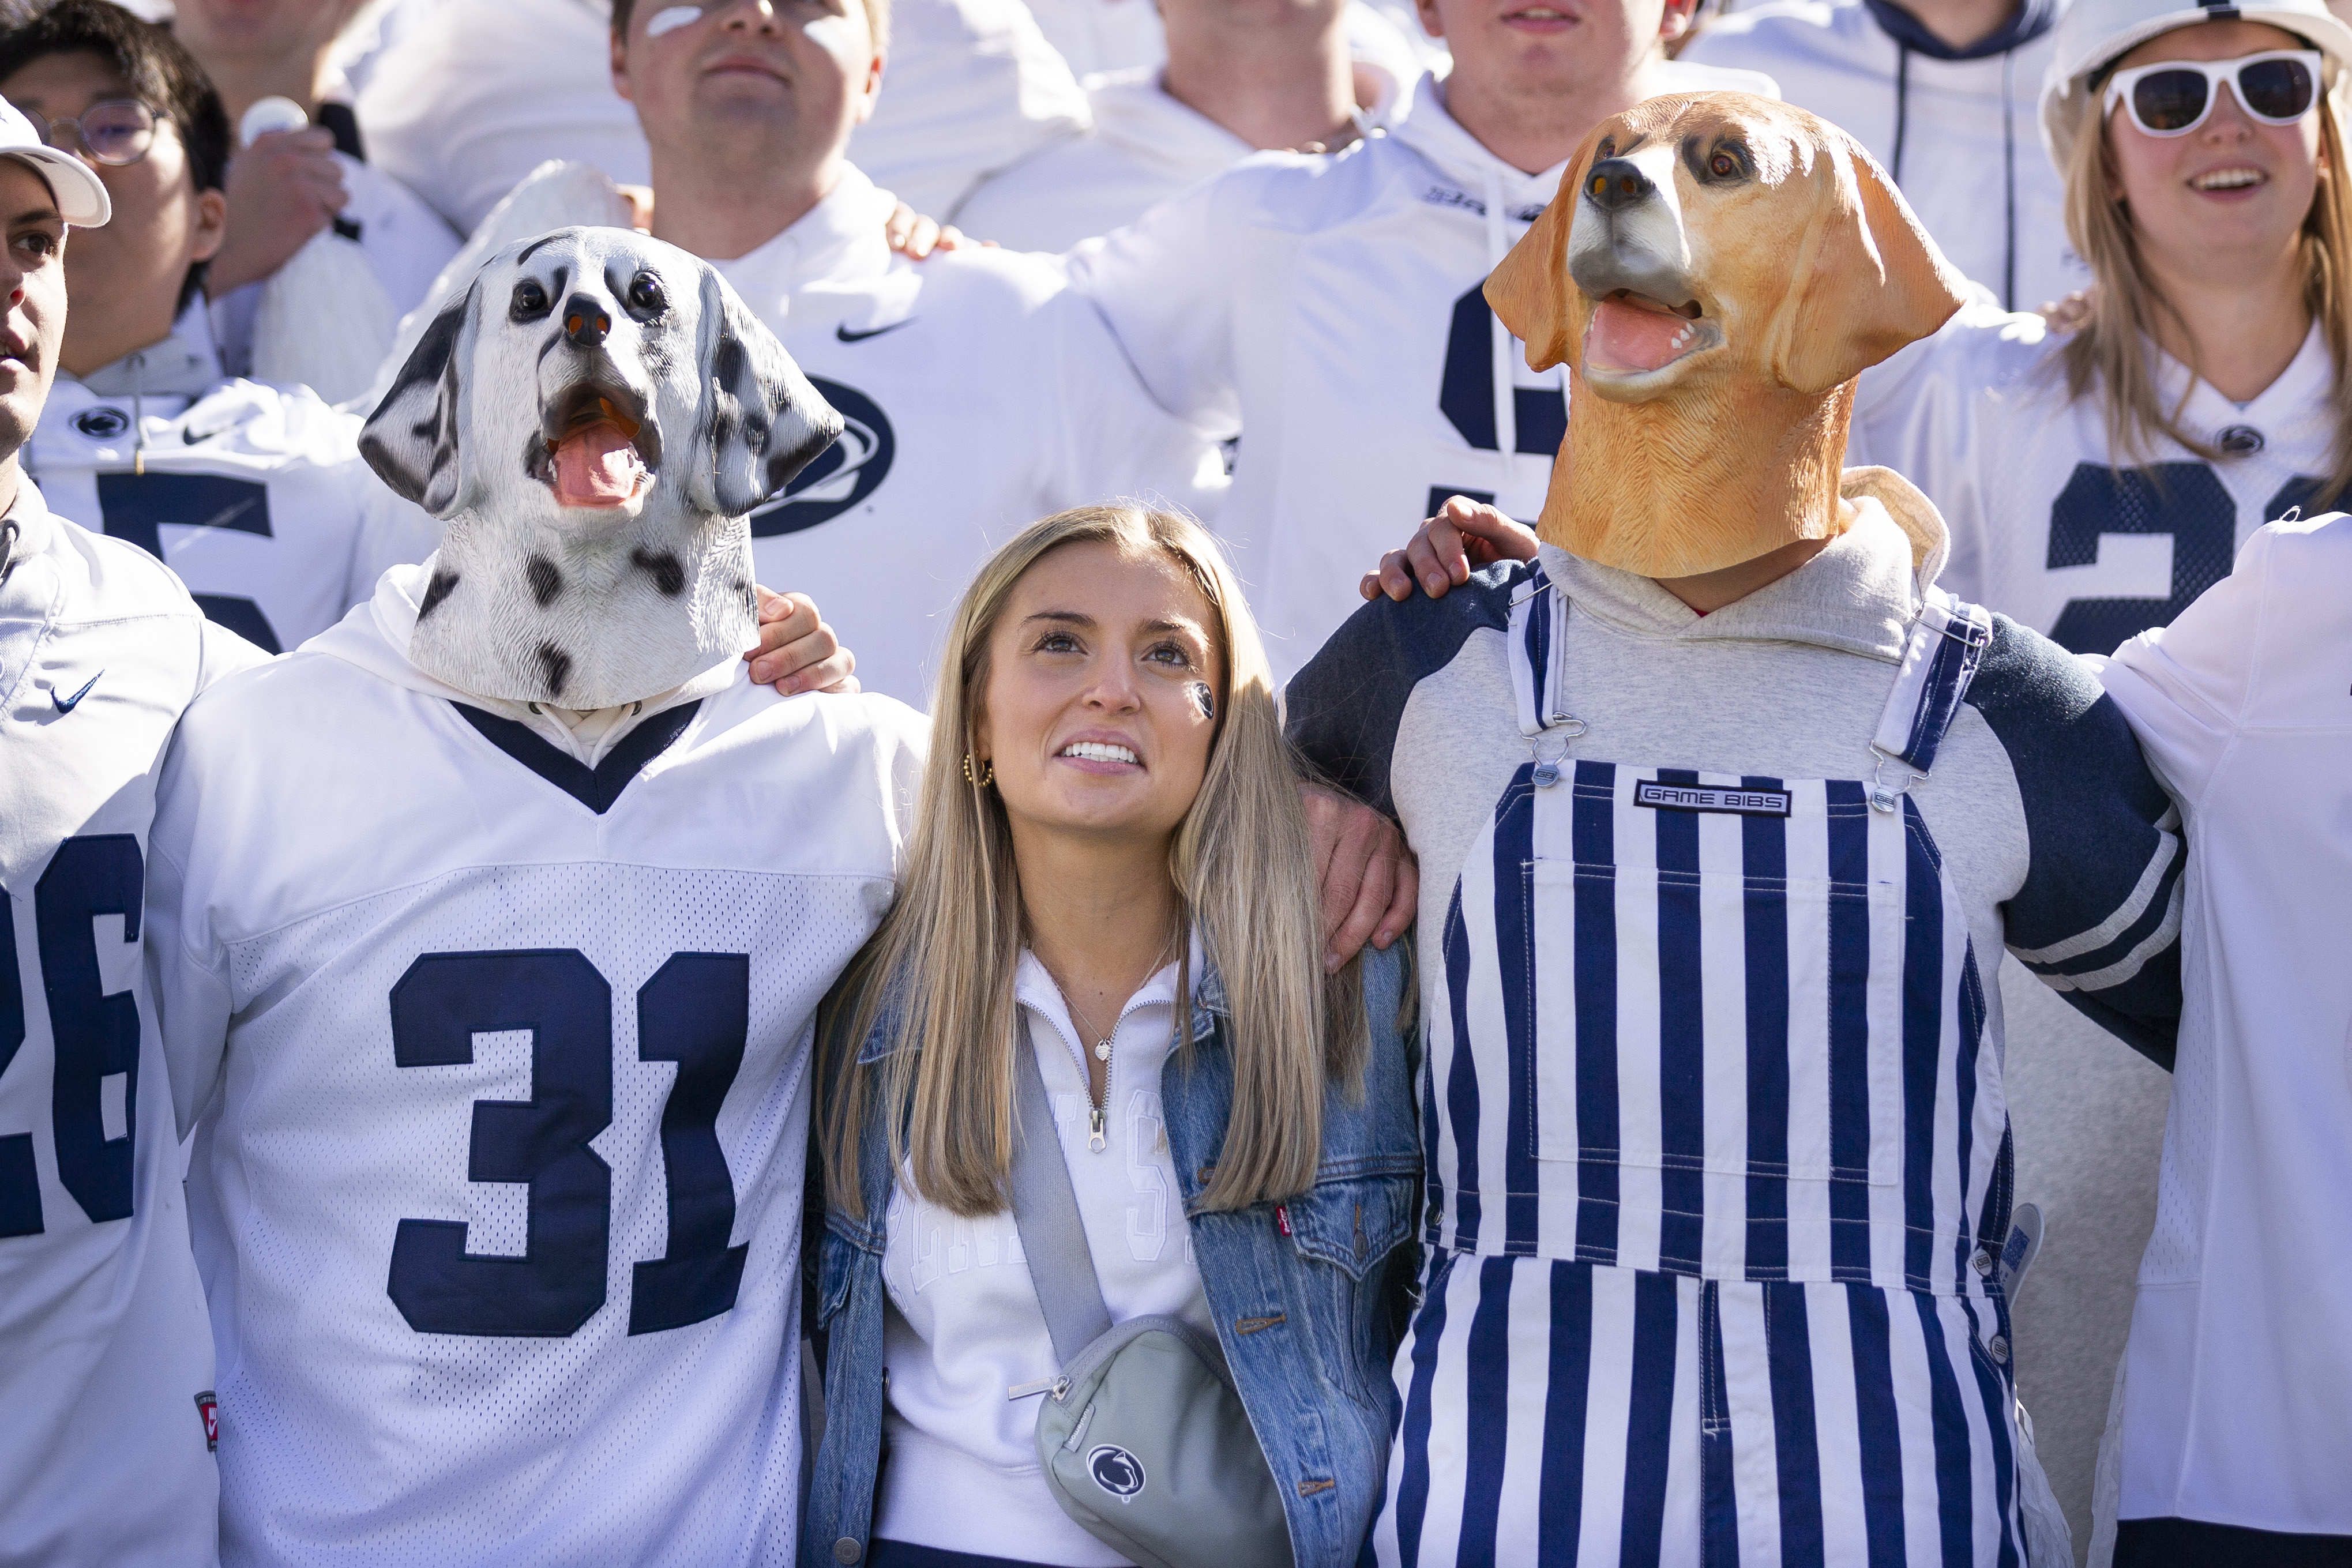 Do you need a subscription to watch PSU football on Peacock